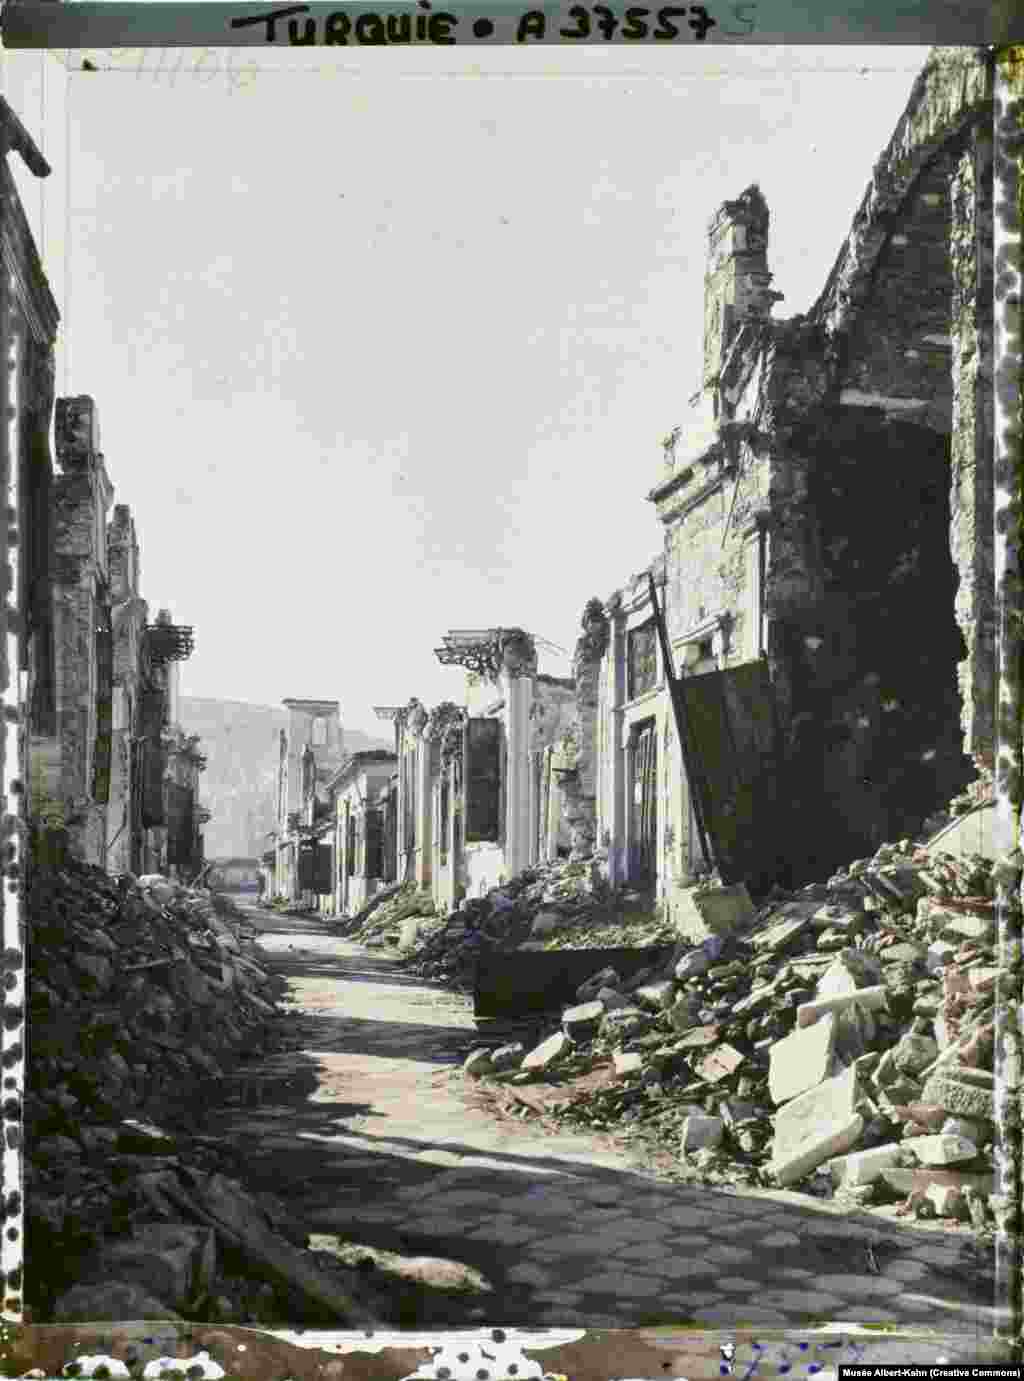 The ruined Armenian quarter of Izmir in 1922.&nbsp; Amid the razing of Izmir, at least thousands of Armenian and Greek residents of the city were killed. Turkish sources claim Armenians and Greeks started the fire to tarnish the reputation of the Turkish military.&nbsp; Today just a few tens of thousands of Christian Armenians remain in Turkey.&nbsp;